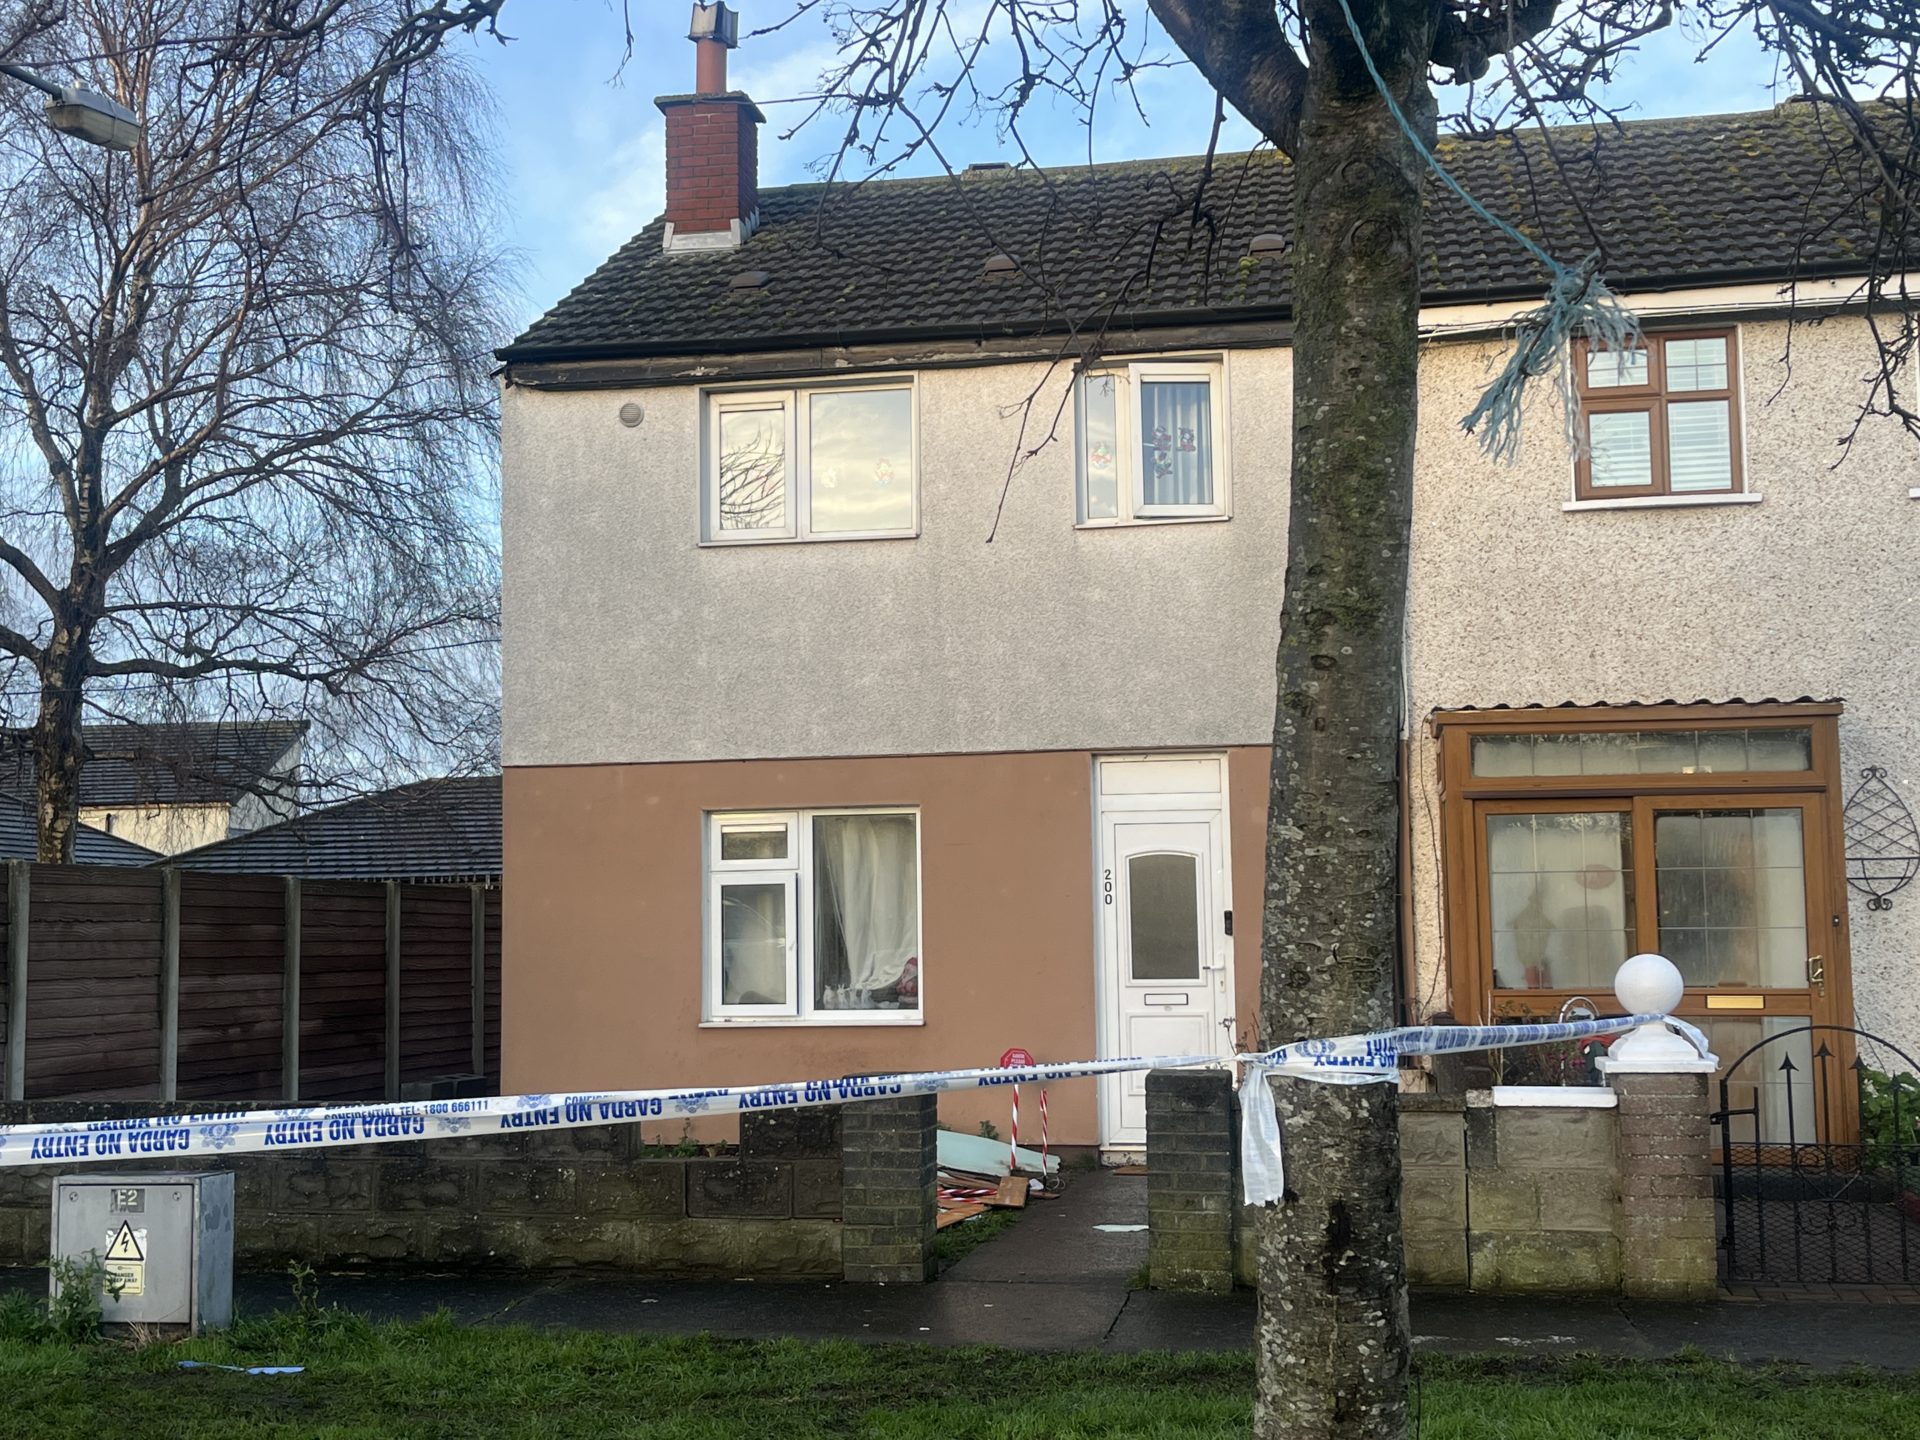 Gardaí at the scene of the killing in the Castle Park area of Tallaght.